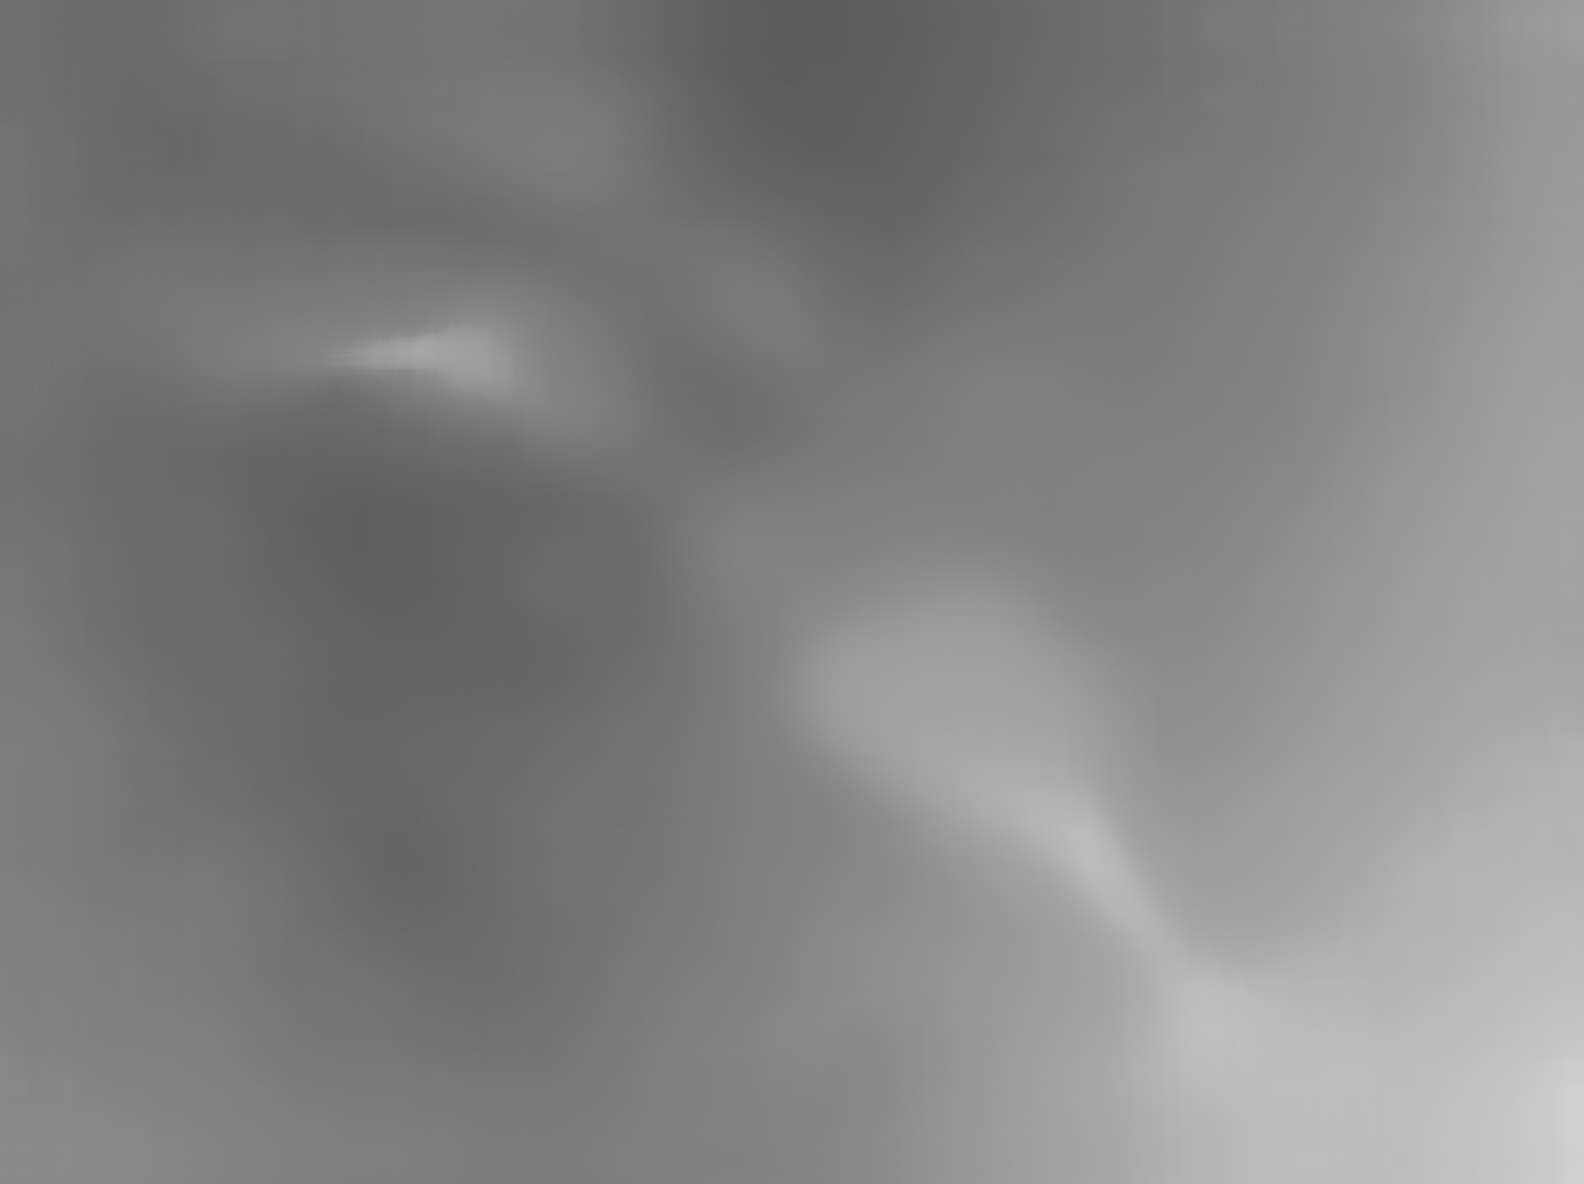 Nasa's Mars rover Curiosity acquired this image using its Mars Hand Lens Imager (MAHLI) on Sol 2643